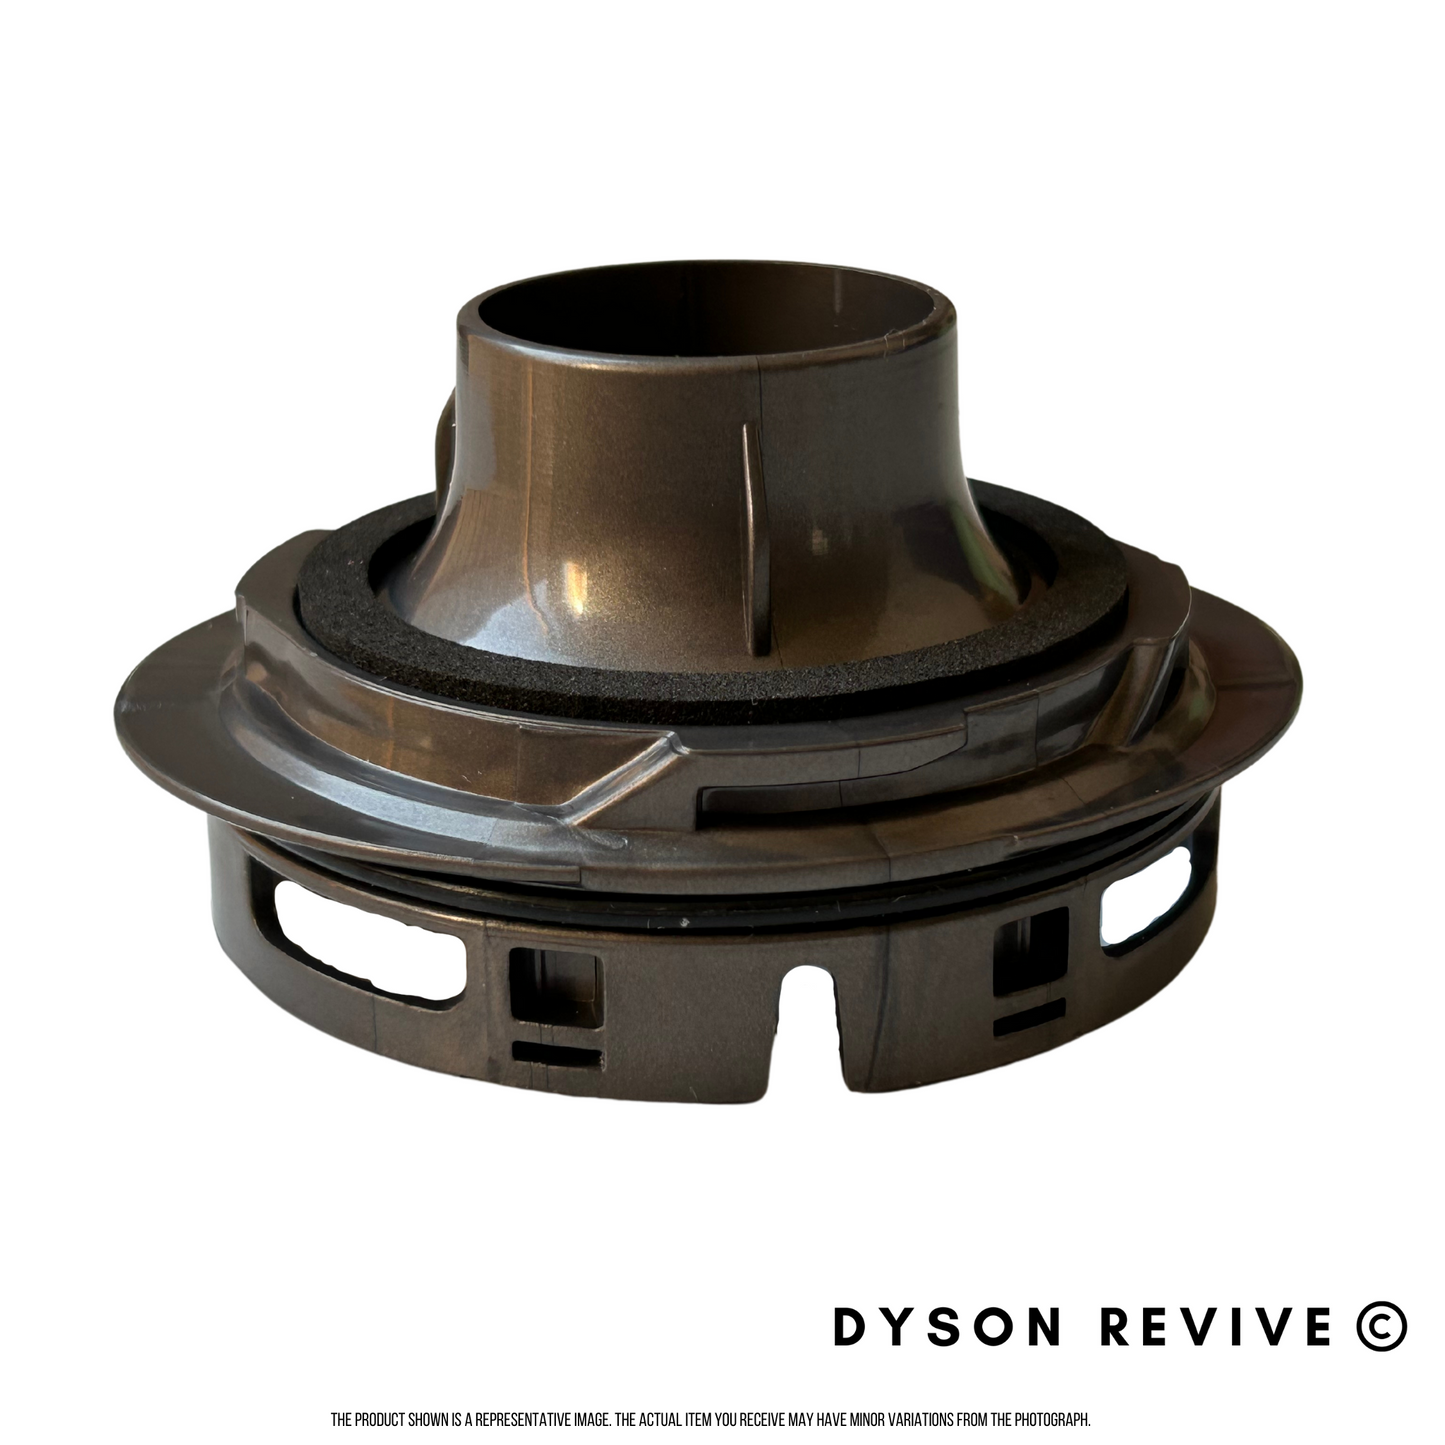 Motor Rear Cover Replacement for Dyson V7 V8 Vacuum Cleaner Accessories - Dyson Revive